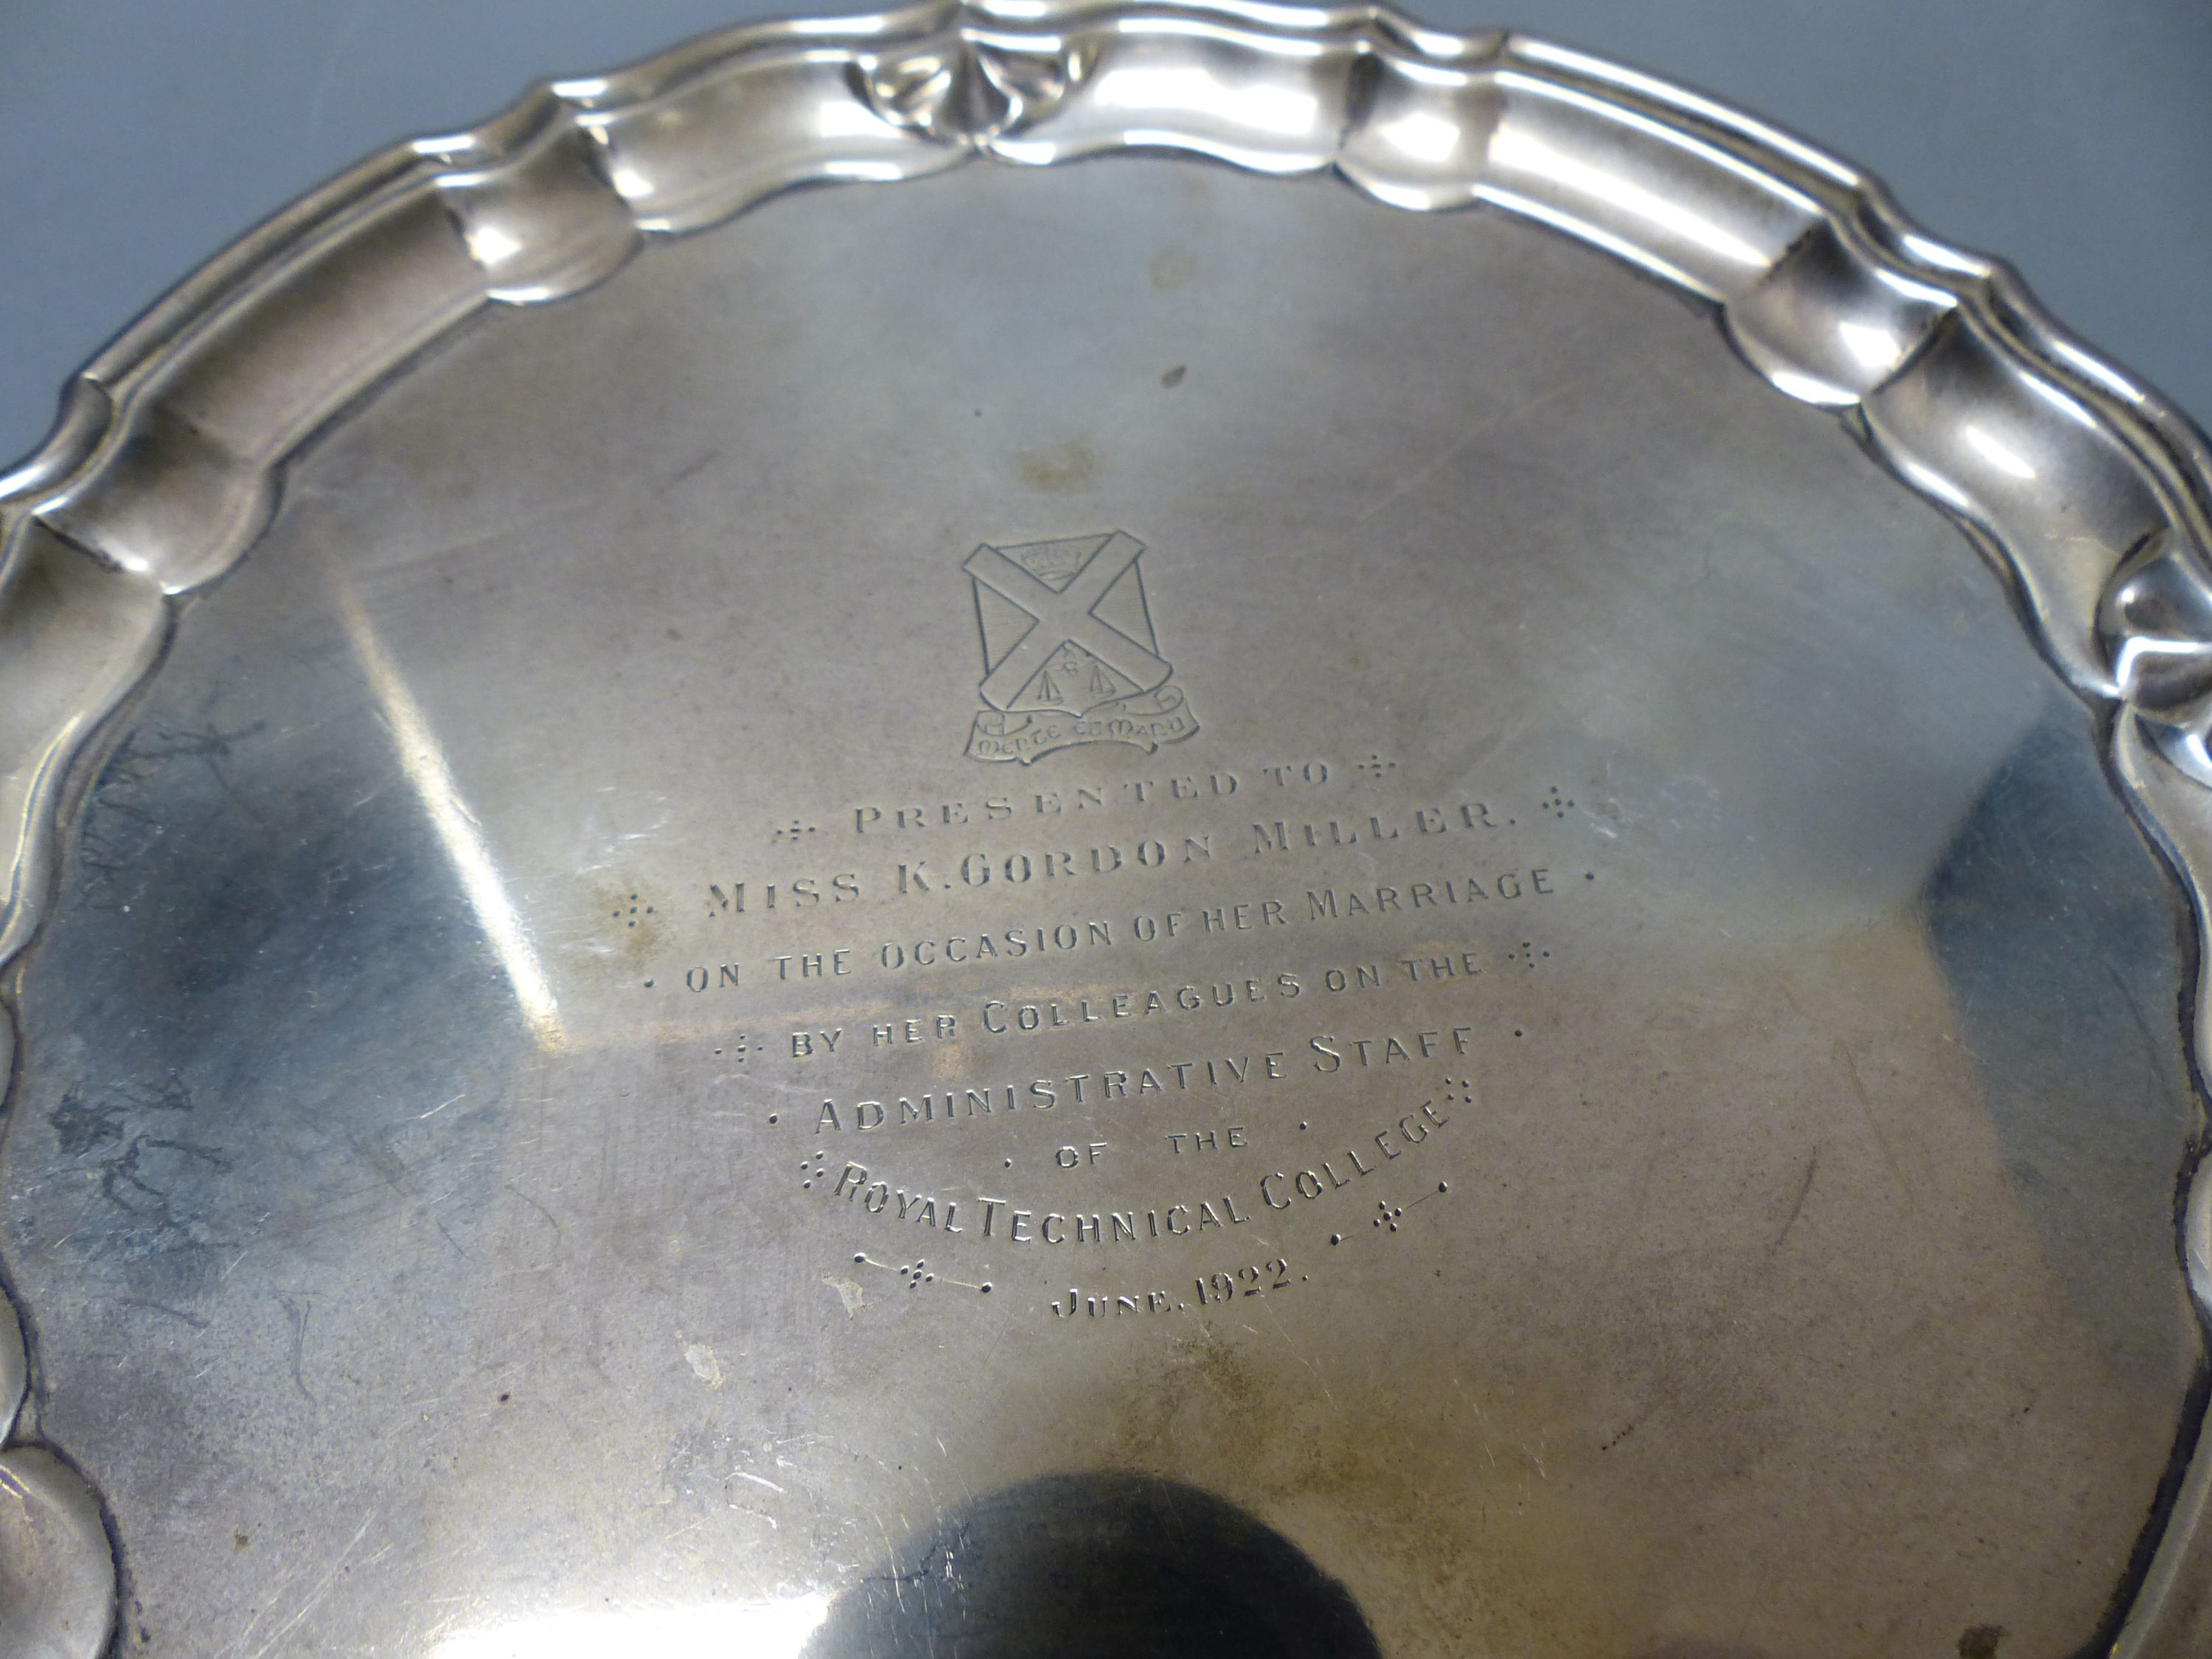 A George V silver waiter, Chester, 1921, 17.9cm and an Italian 800 standard white metal bowl embossed with fruit